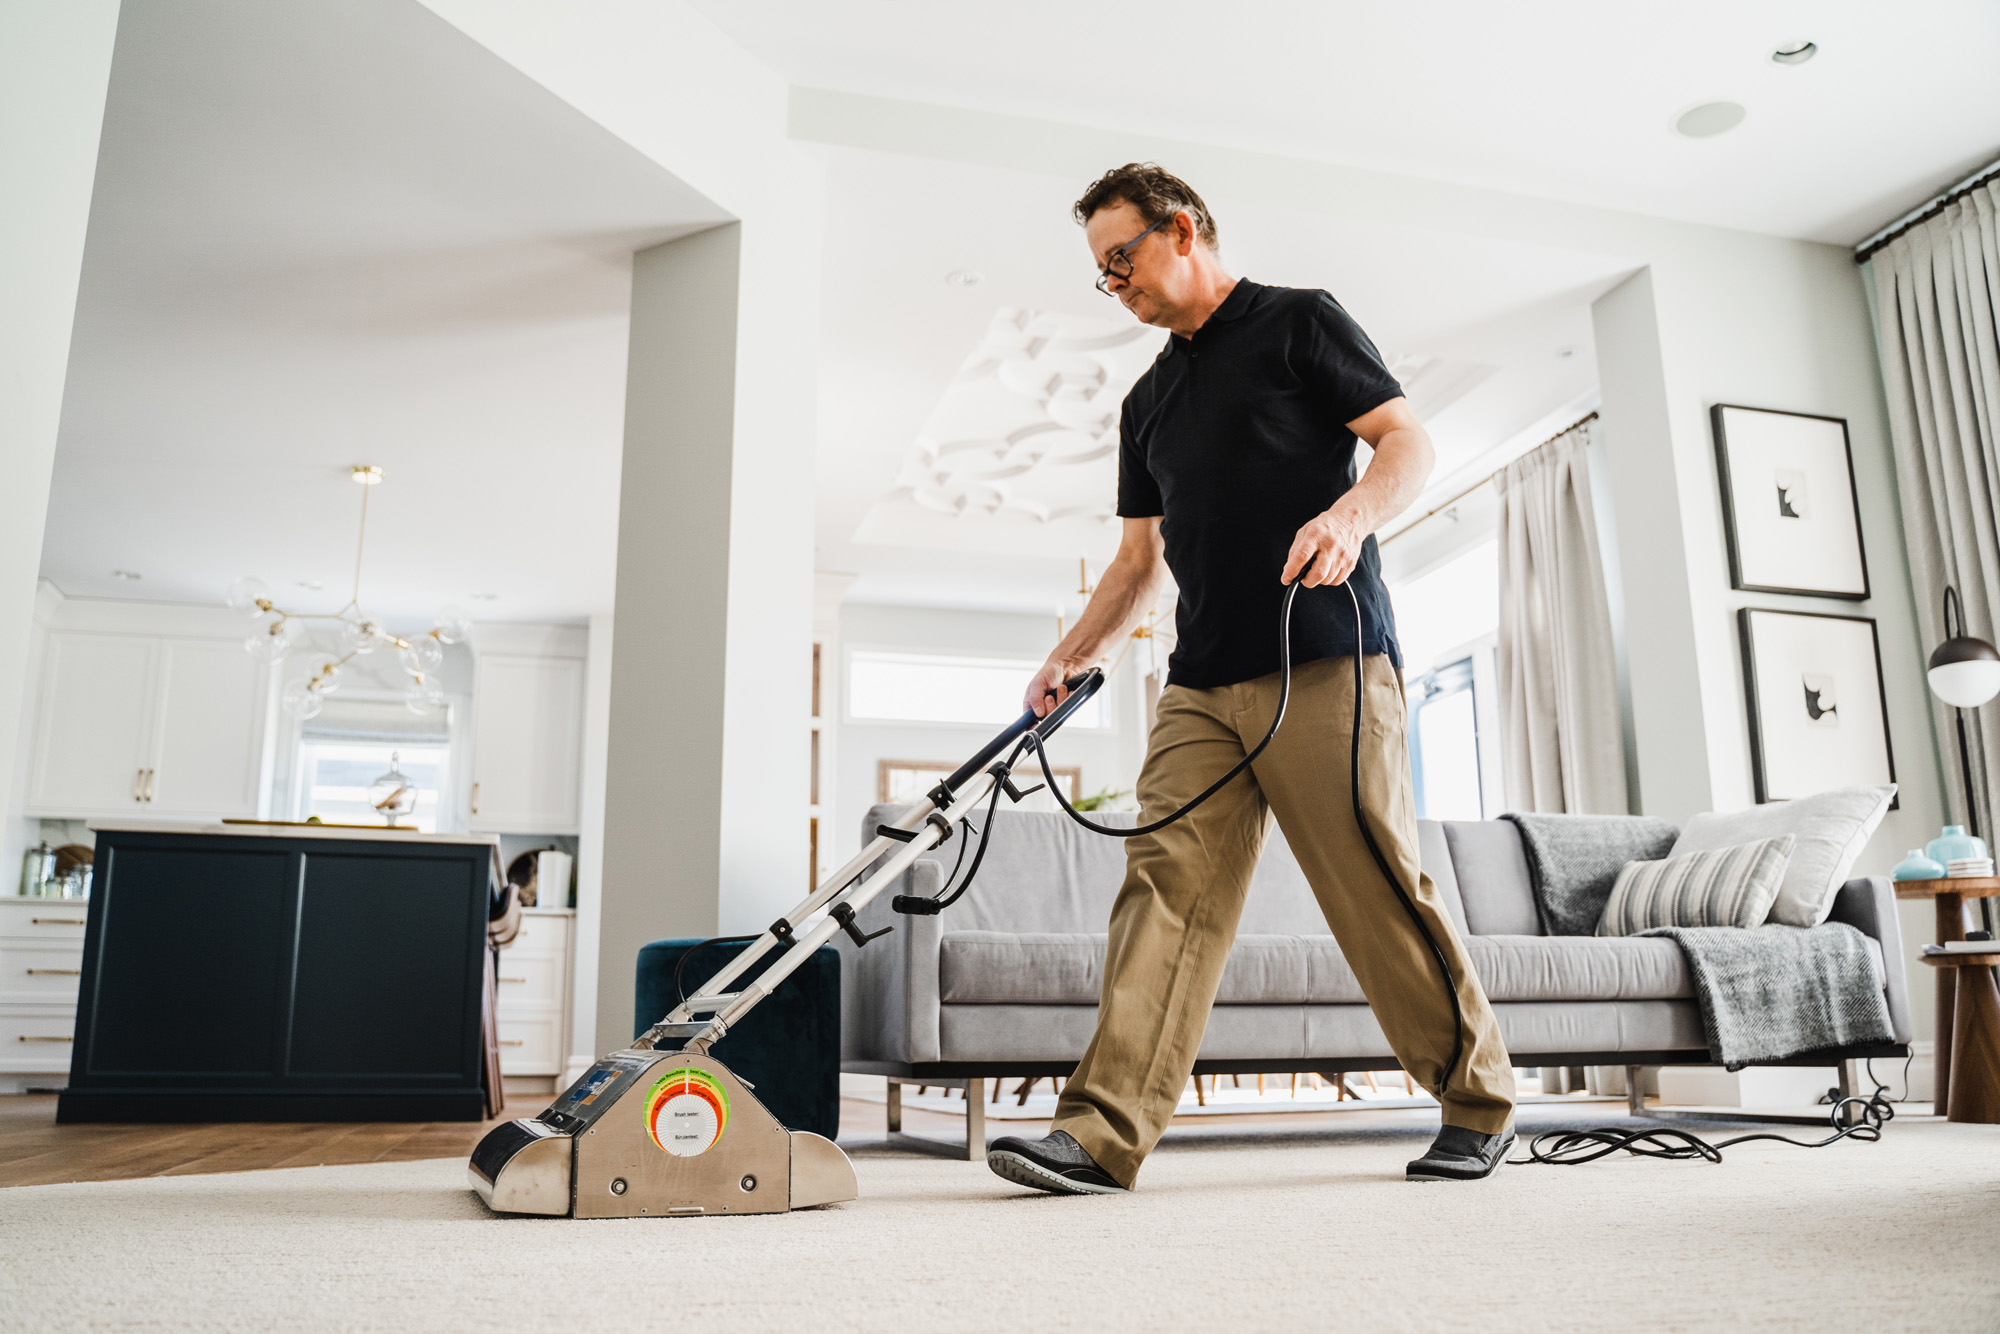 Home vacuum cleaner. Чистый дом и хозяин. Eco Carpet Cleaning. Clean Wash Carpet. Home Carpet Cleaning service.